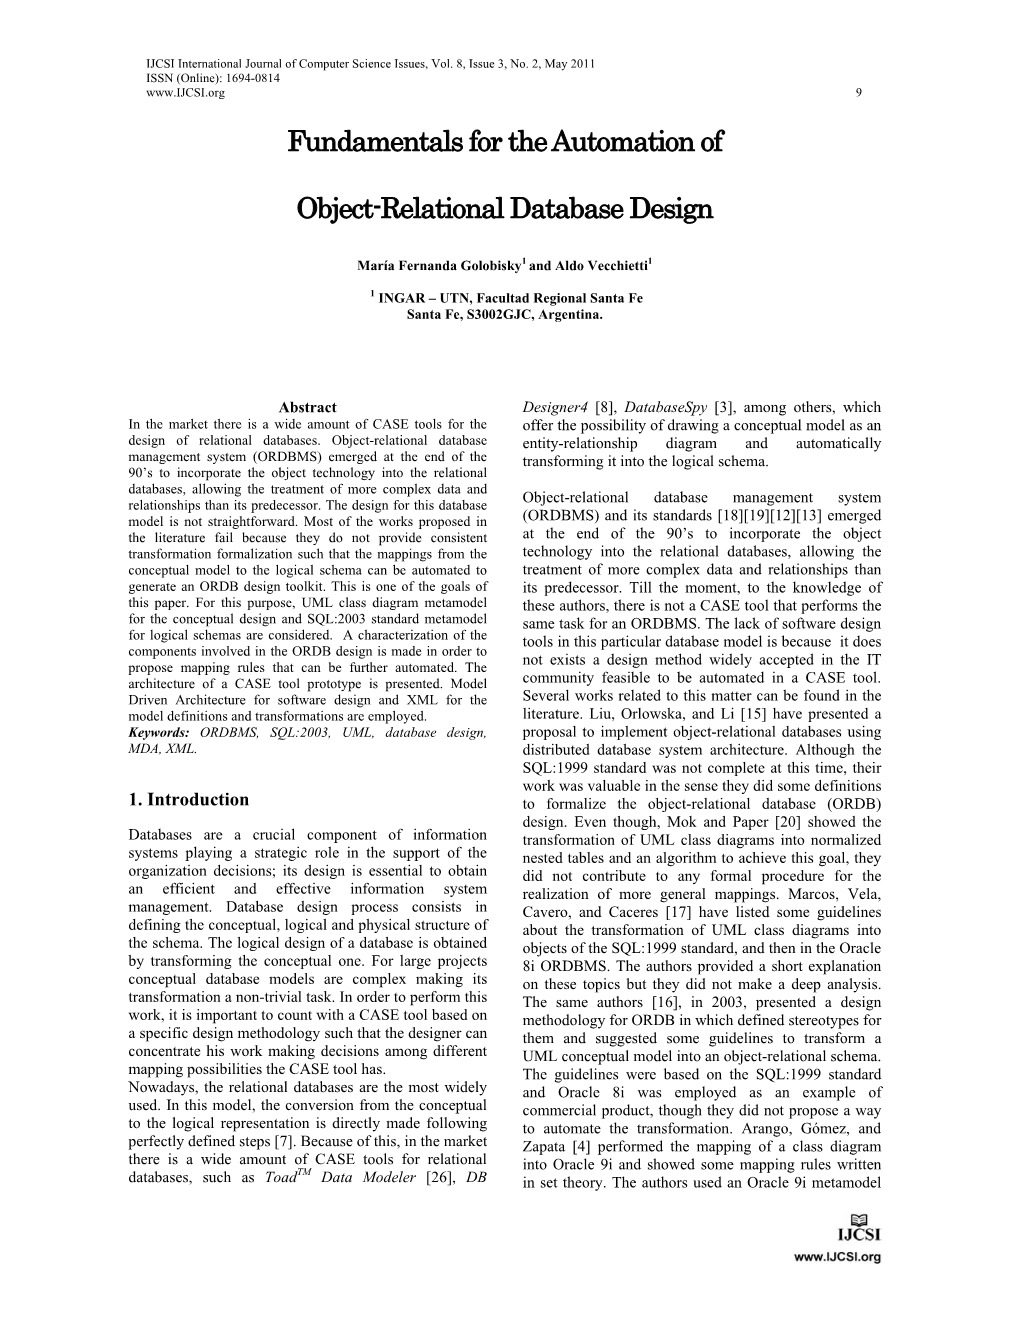 Fundamentals for the Automation of Object-Relational Database Design